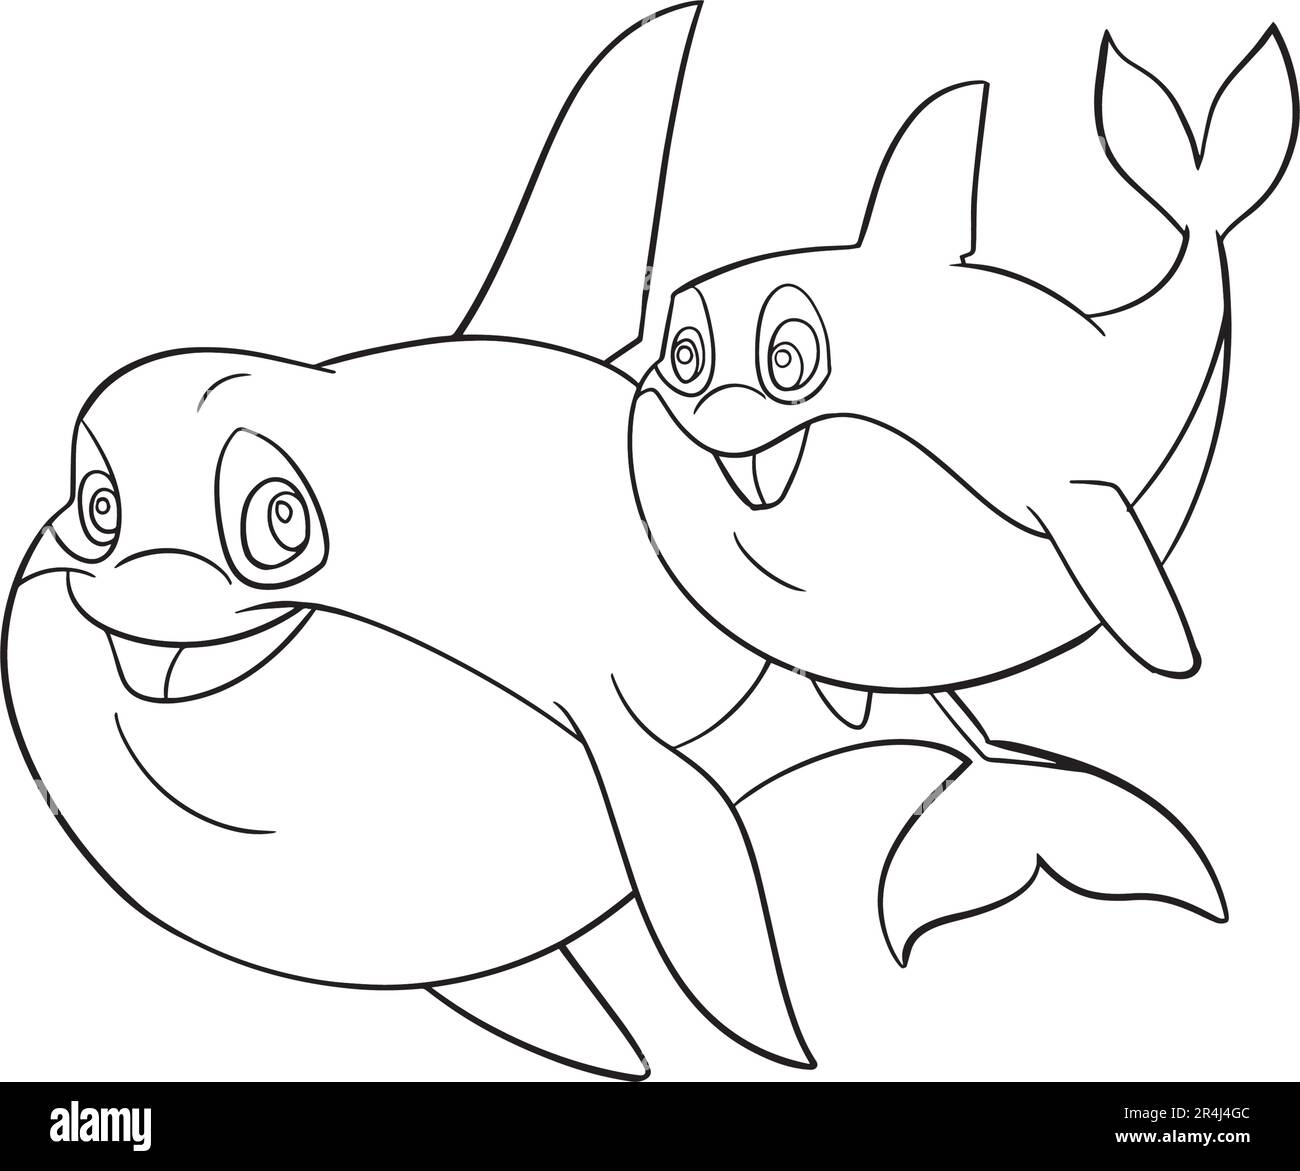 Sea animals group coloring page. Ocean fish, octopus, dolphin, shark ...